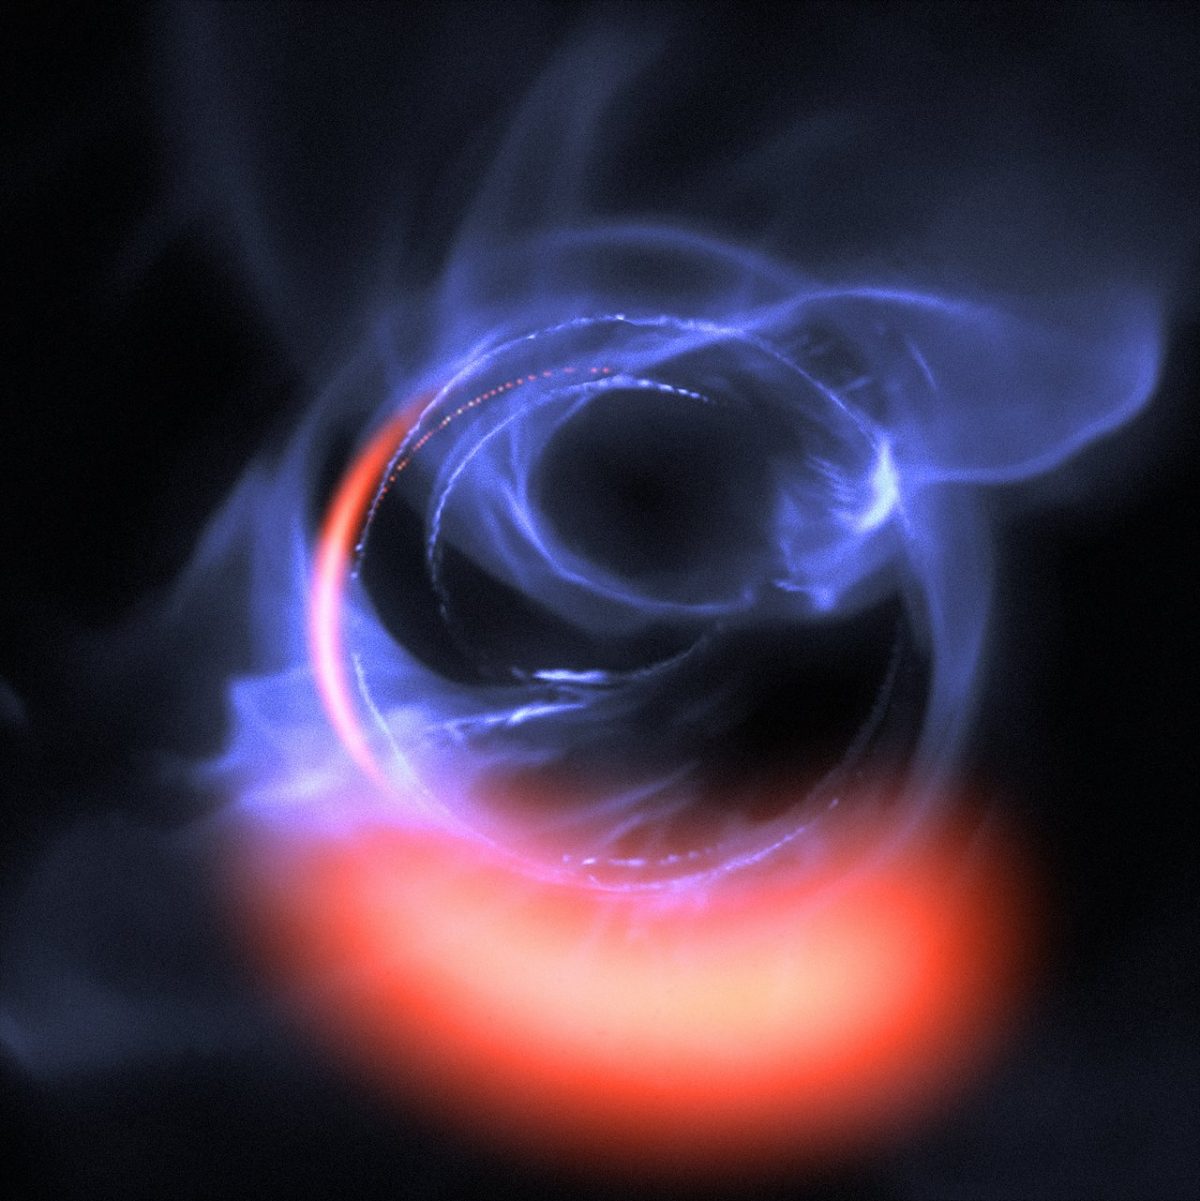 Scientists Confirm There's a Monster Black Hole in the Heart of our Galaxy